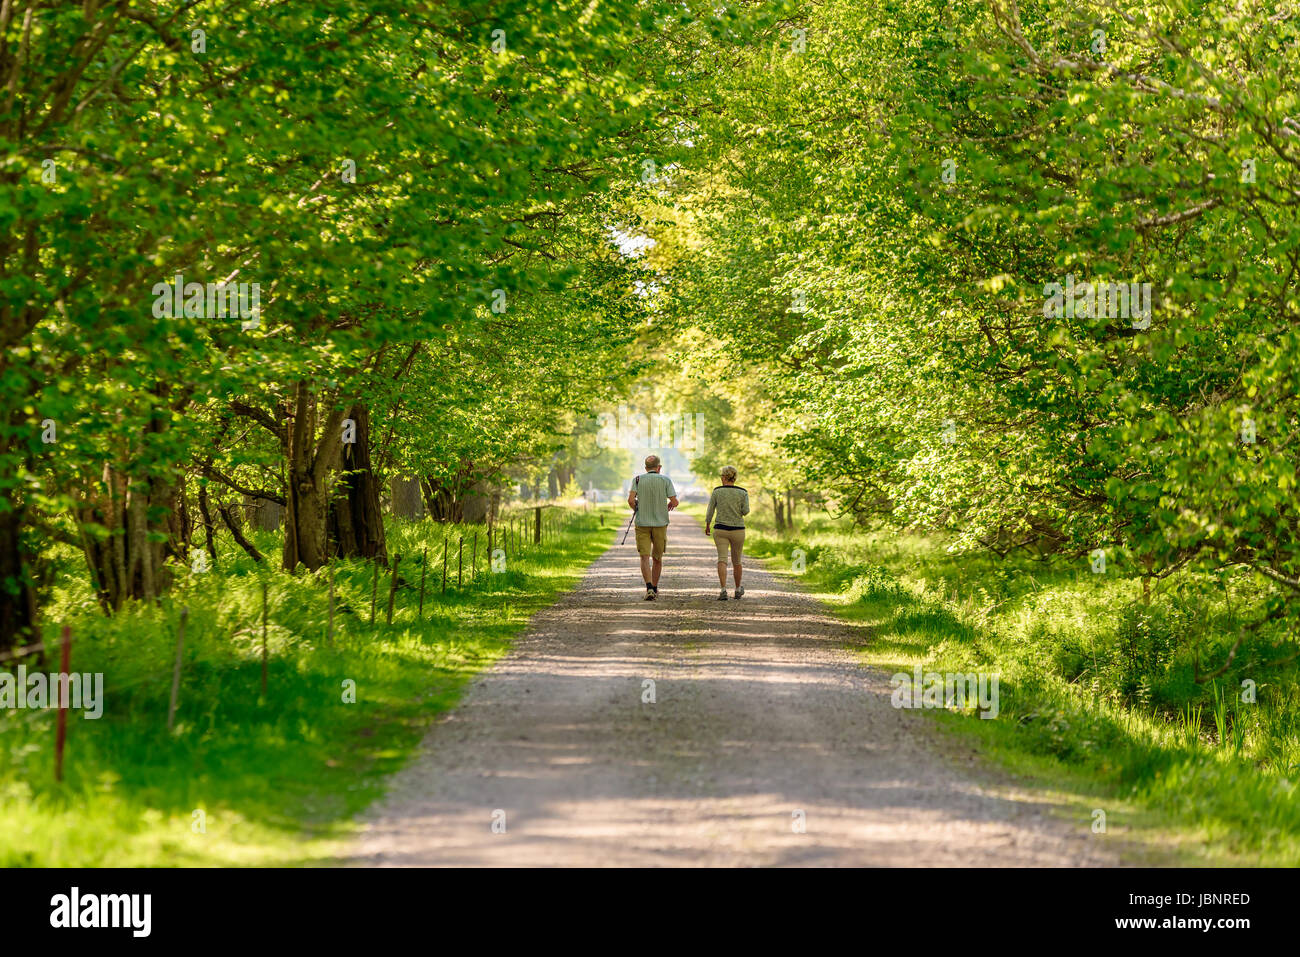 Ottenby, Sweden - May 27, 2017: Environmental documentary. Senior couple walking and birdwatching on straight narrow country road. Trees forming a tun Stock Photo